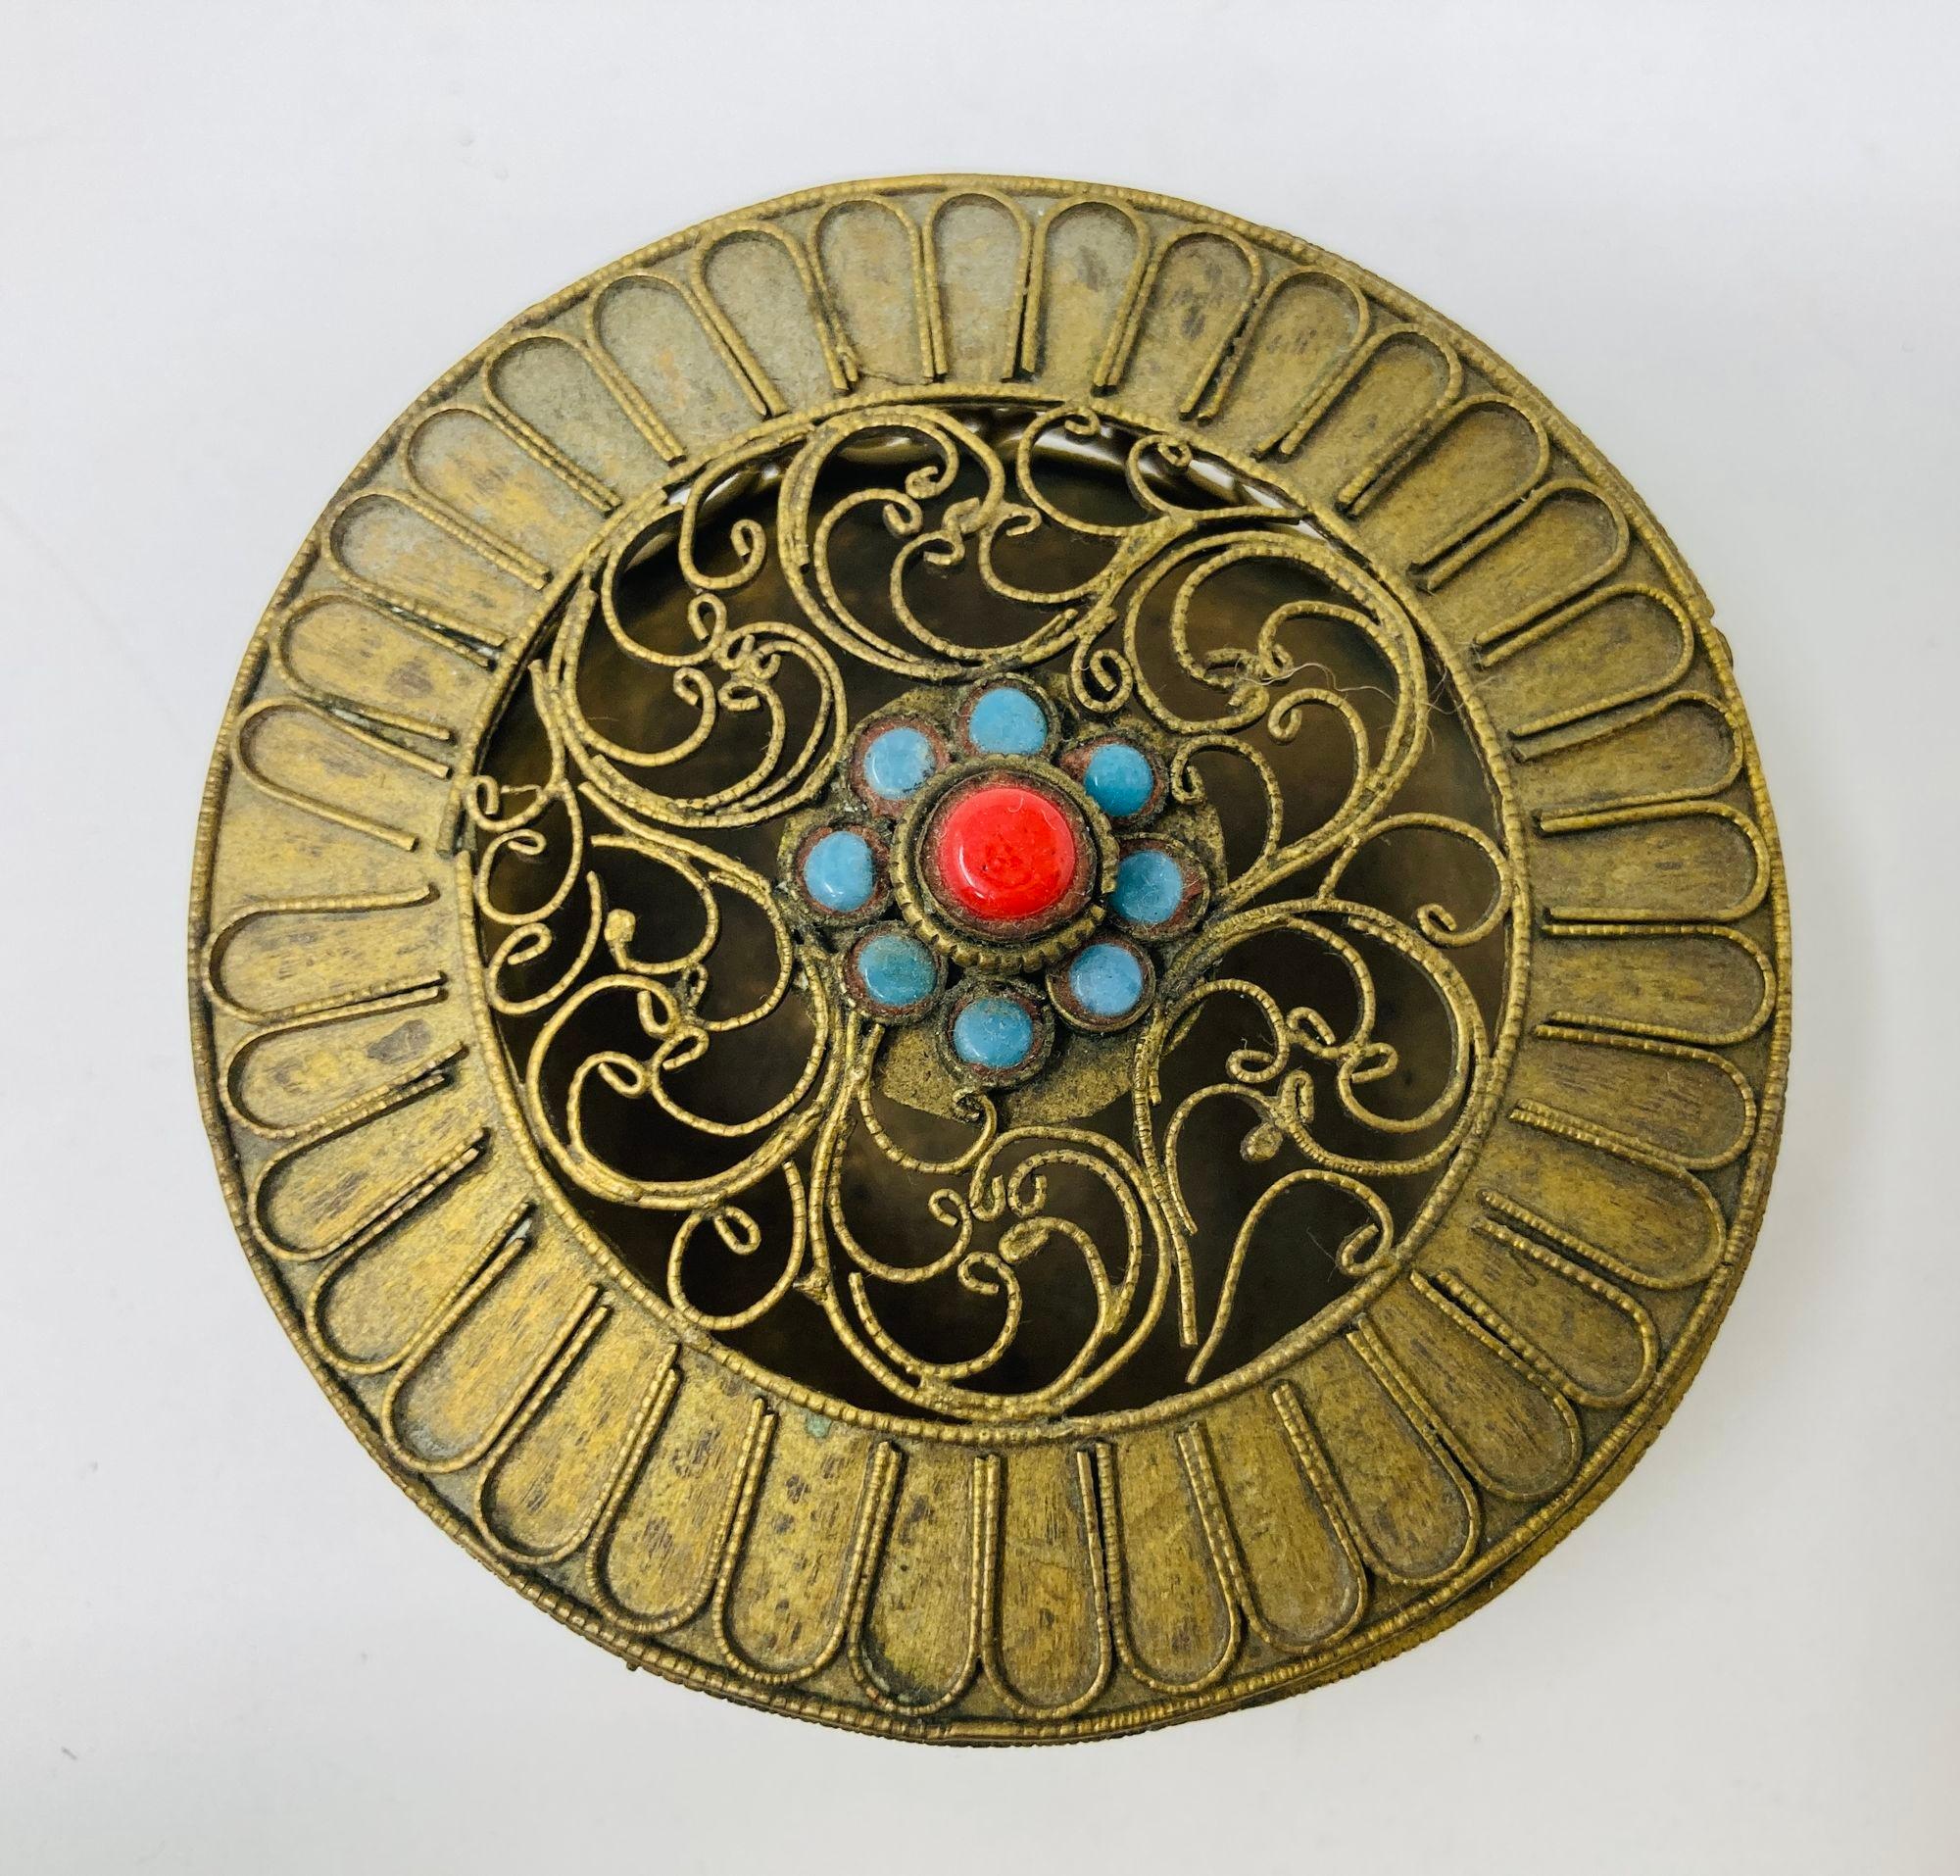 Collectible Chinese Tibetan Gilt Brass Metal Filigree with Turquoise and Coral beads round Box Handcrafted round Tibetan, Nepalese decorative brass trinket wish box with pull-off lid.
Antique gilt metal wish box. The round box is crafted in open